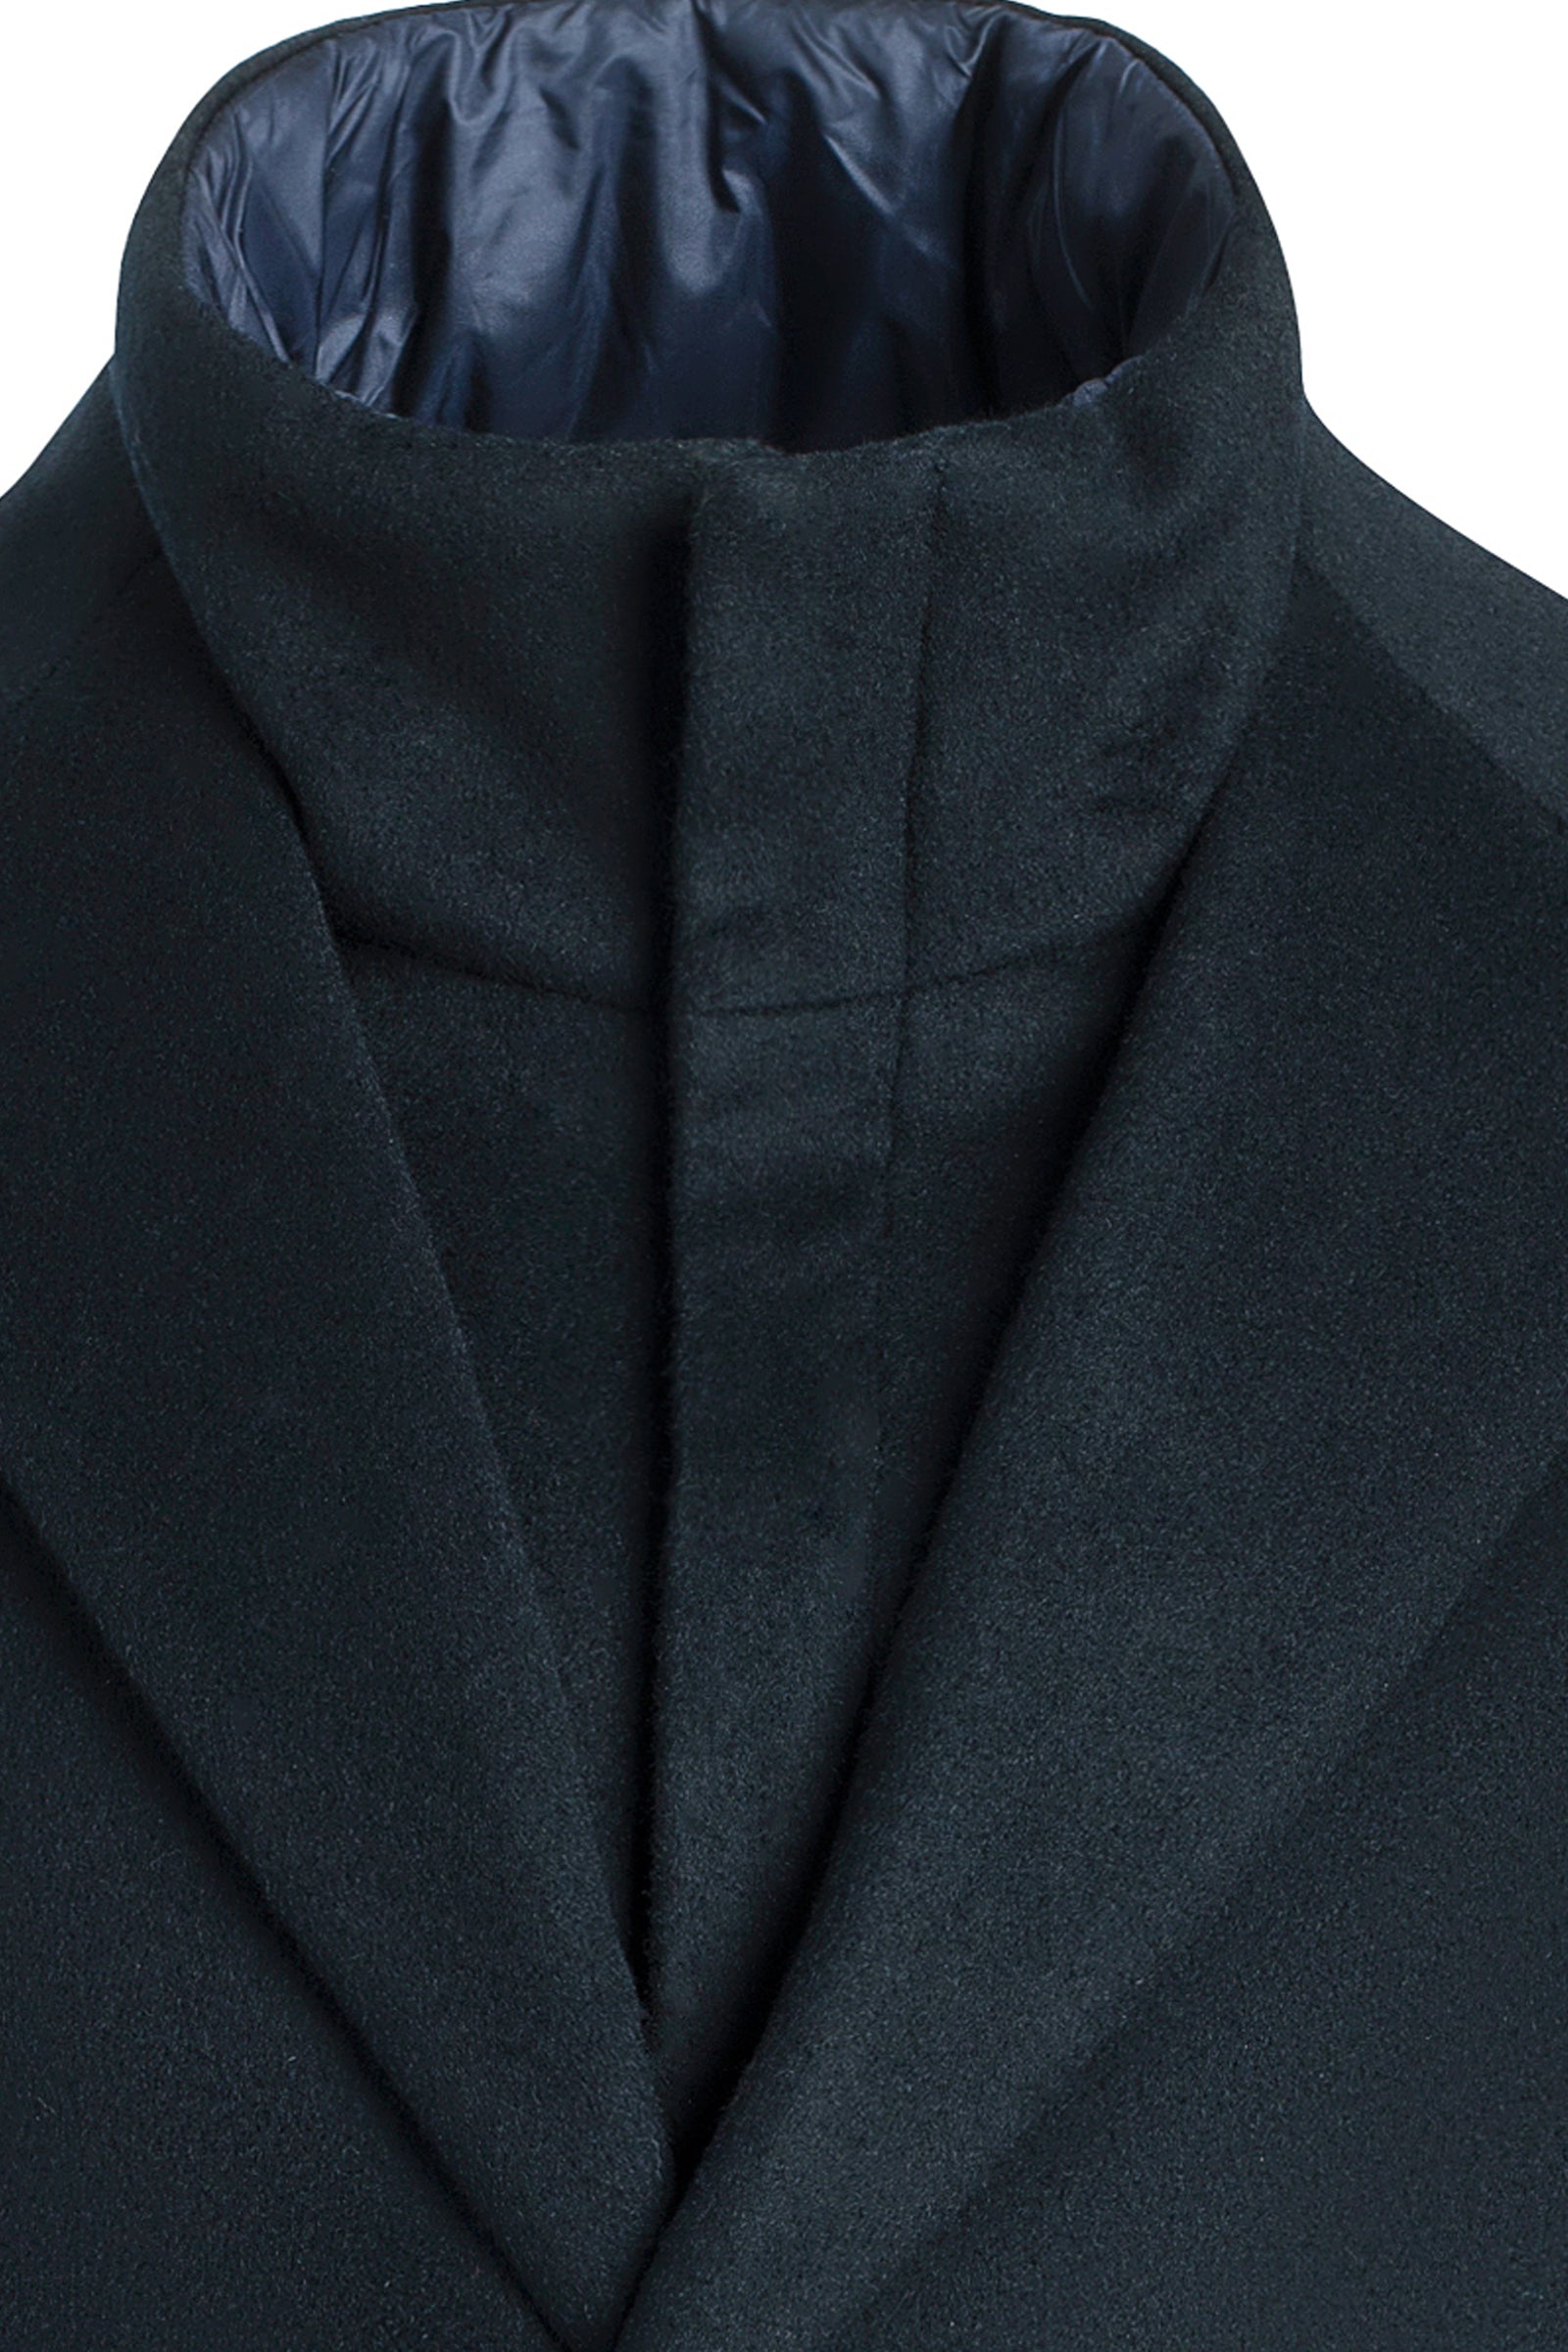 TERRENCE NAVY WOOL & CASHMERE TOP COAT - Cardinal of Canada-CA - Terrance navy wool and cashmere top coat 36 inch length